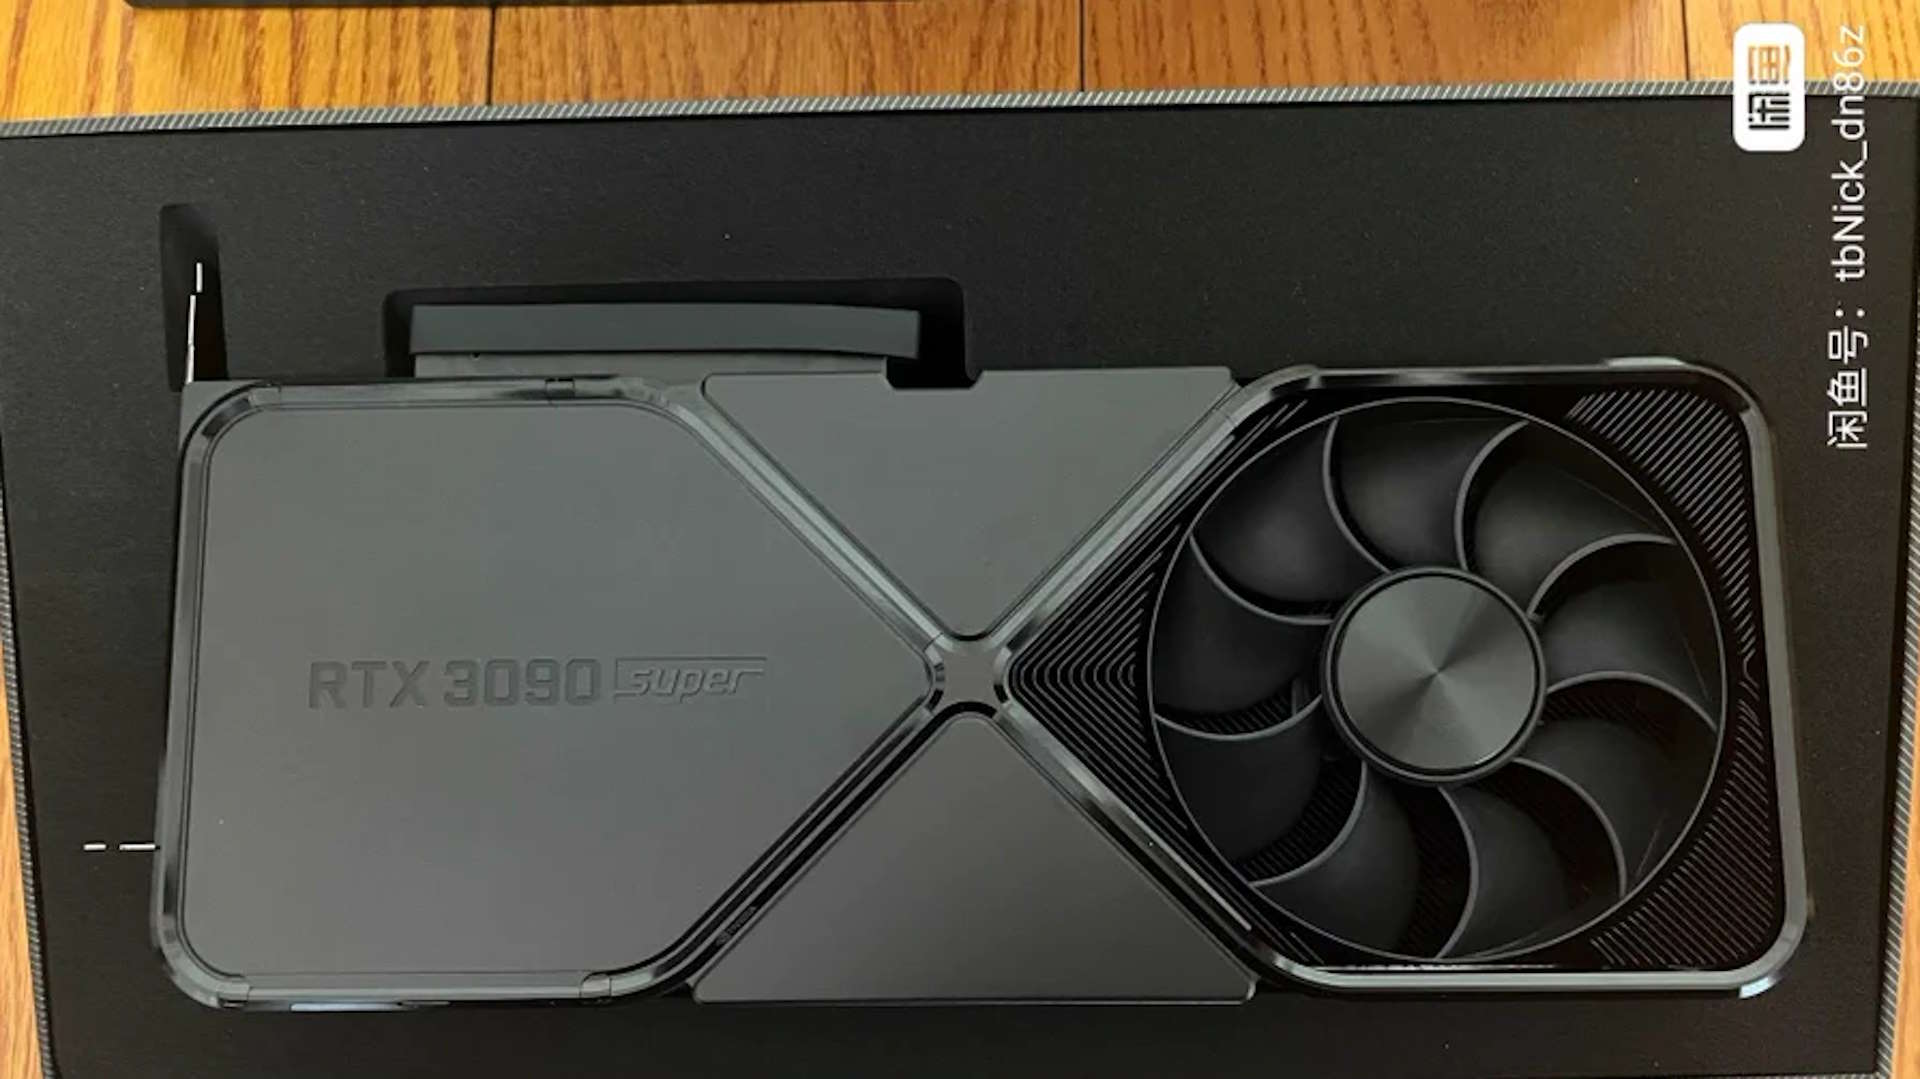  I never wanted the RTX 3090 Super but I'm gutted to miss out on the cancelled prototype's stealthy all-black aesthetic 